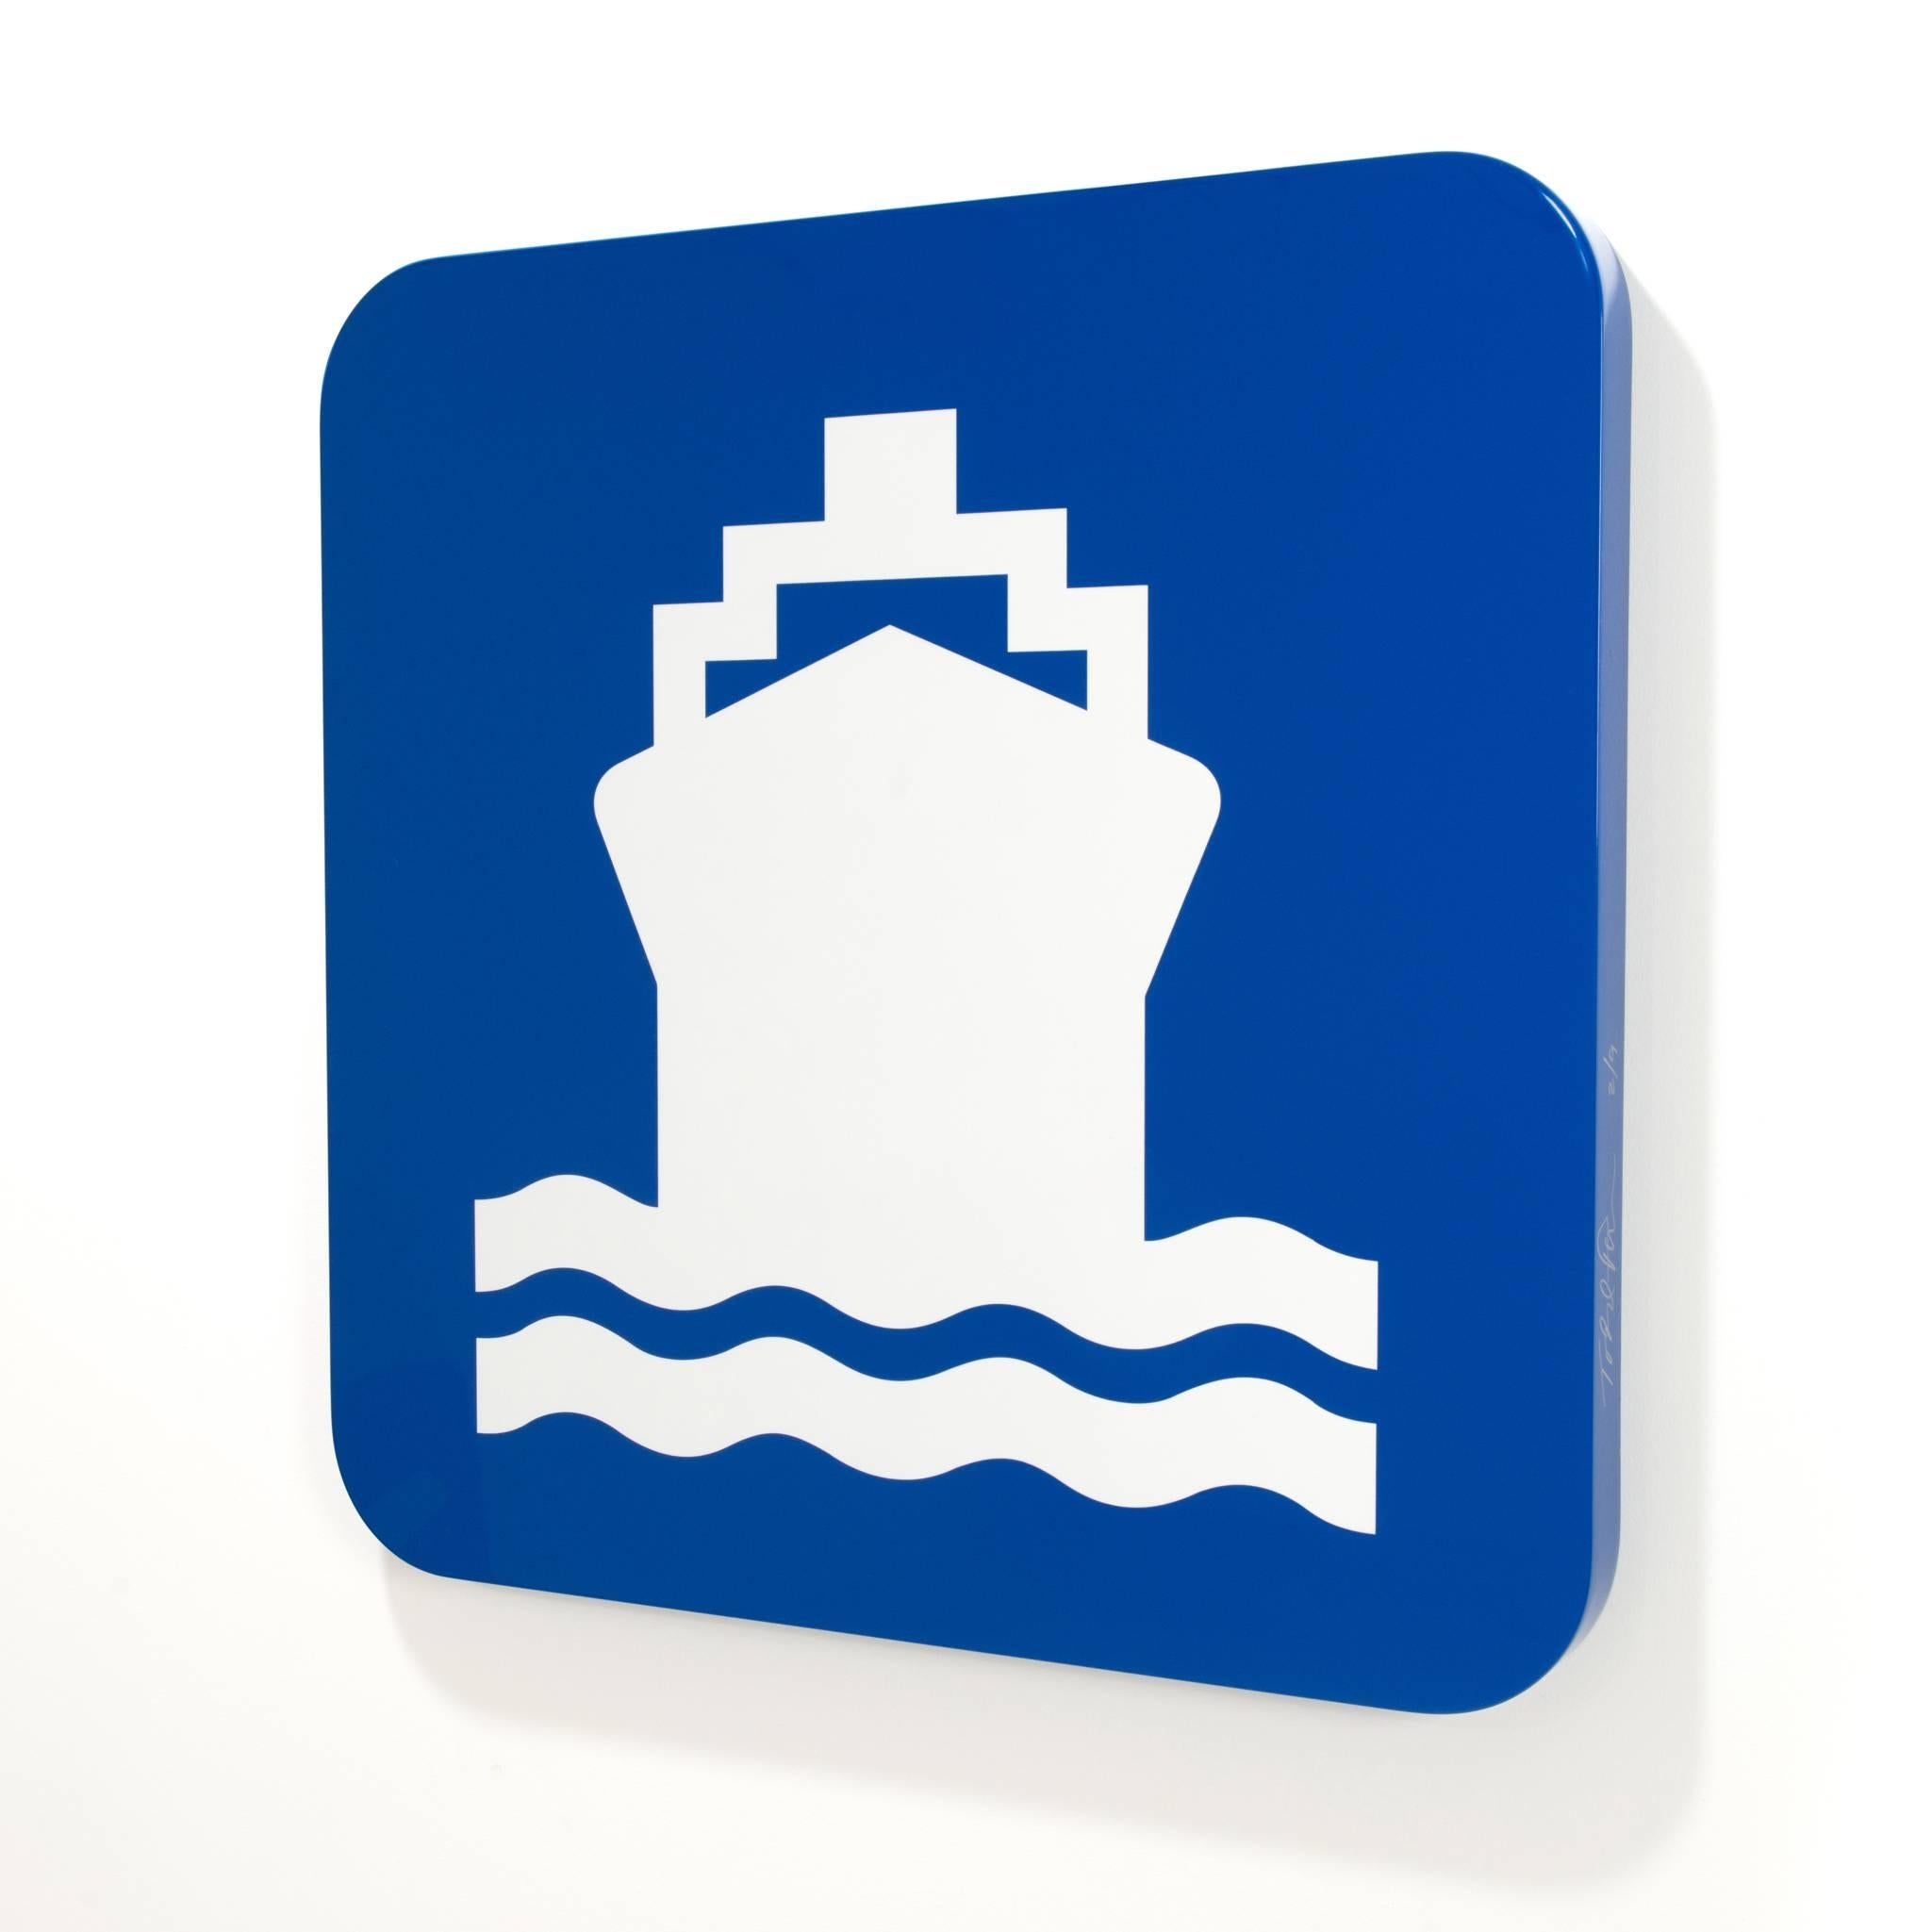 Todd Pierce
Royal Blue Cruise Ship 
2016
Sign Plaque/ Installation  
27 x 27 x 1.76 

Todd Pierce is inspired by Andy Warhol, who taught us through his silk-screened images of Campbell Soup cans back in 1962, that objects of our popular culture can